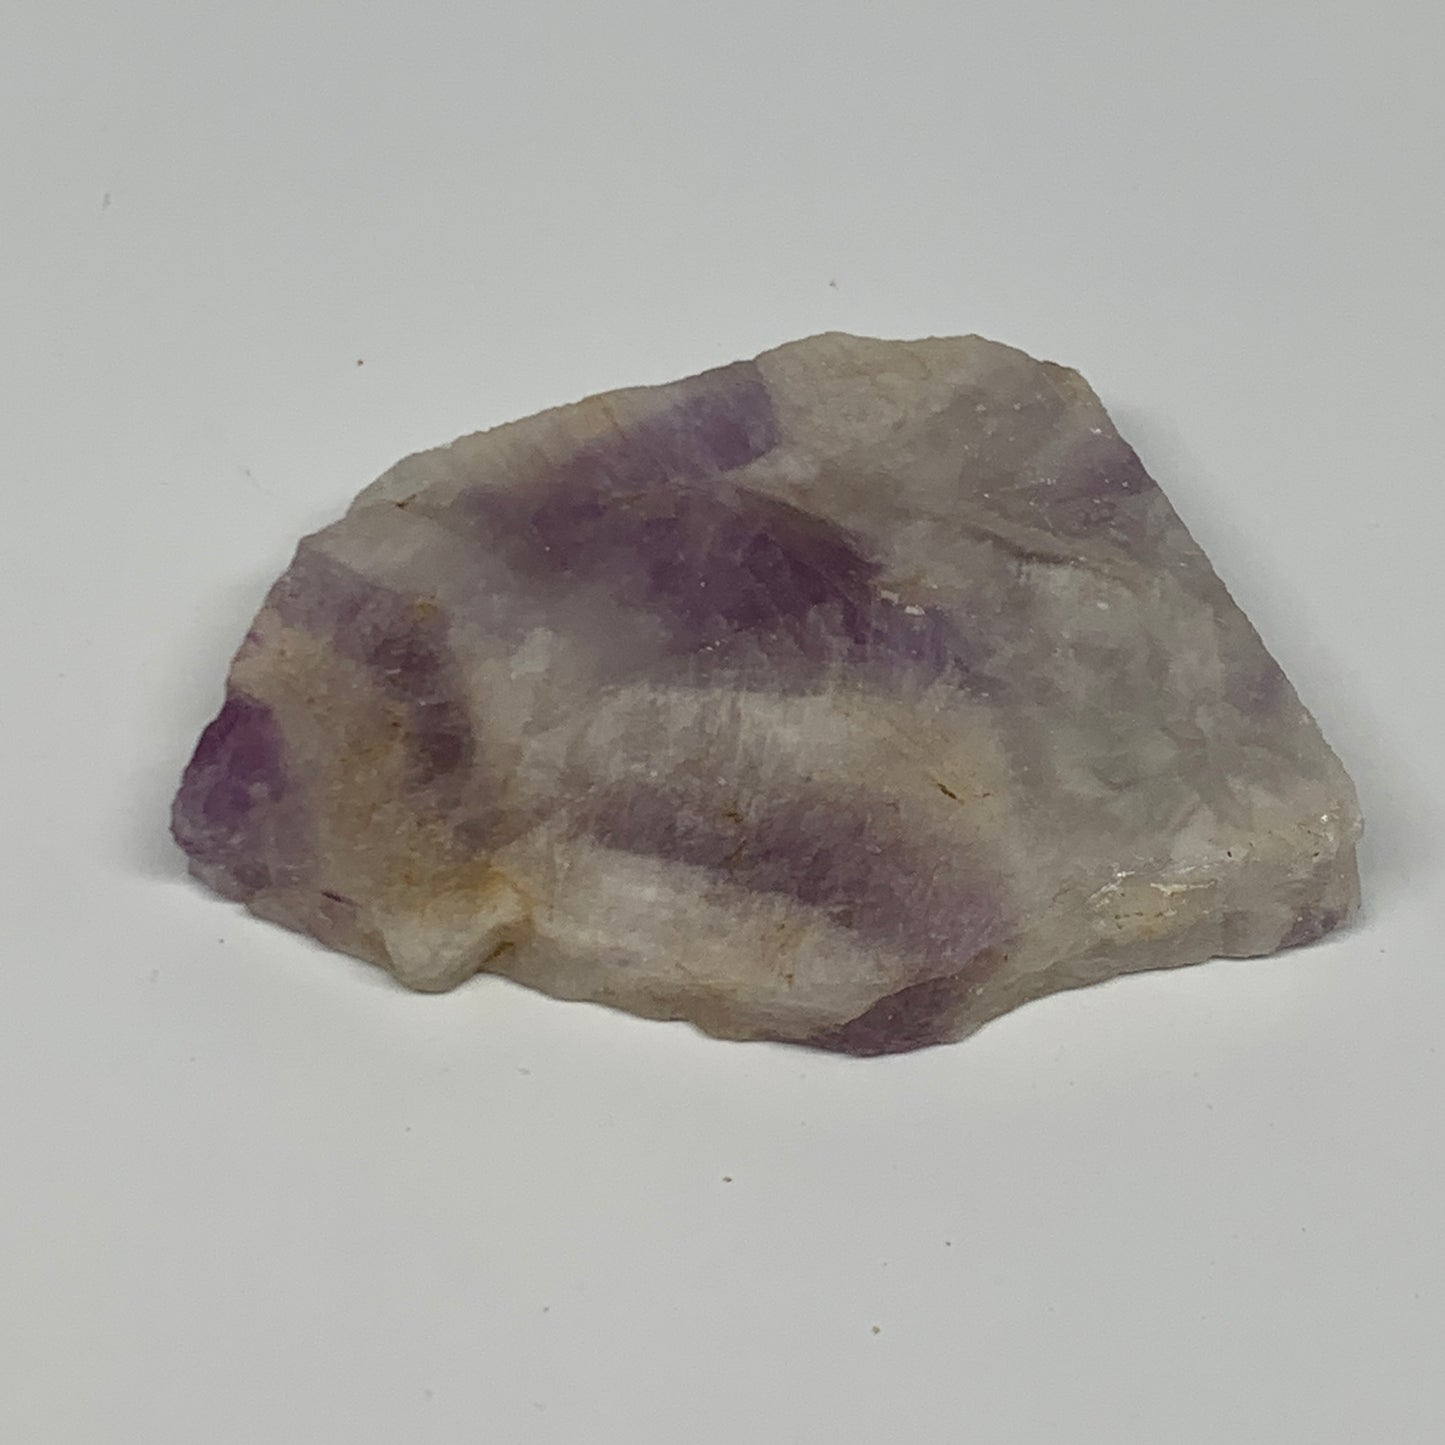 95.2g, 2.9"x2.2"x0.5", One face polished Banned Amethyst, One face semi polished